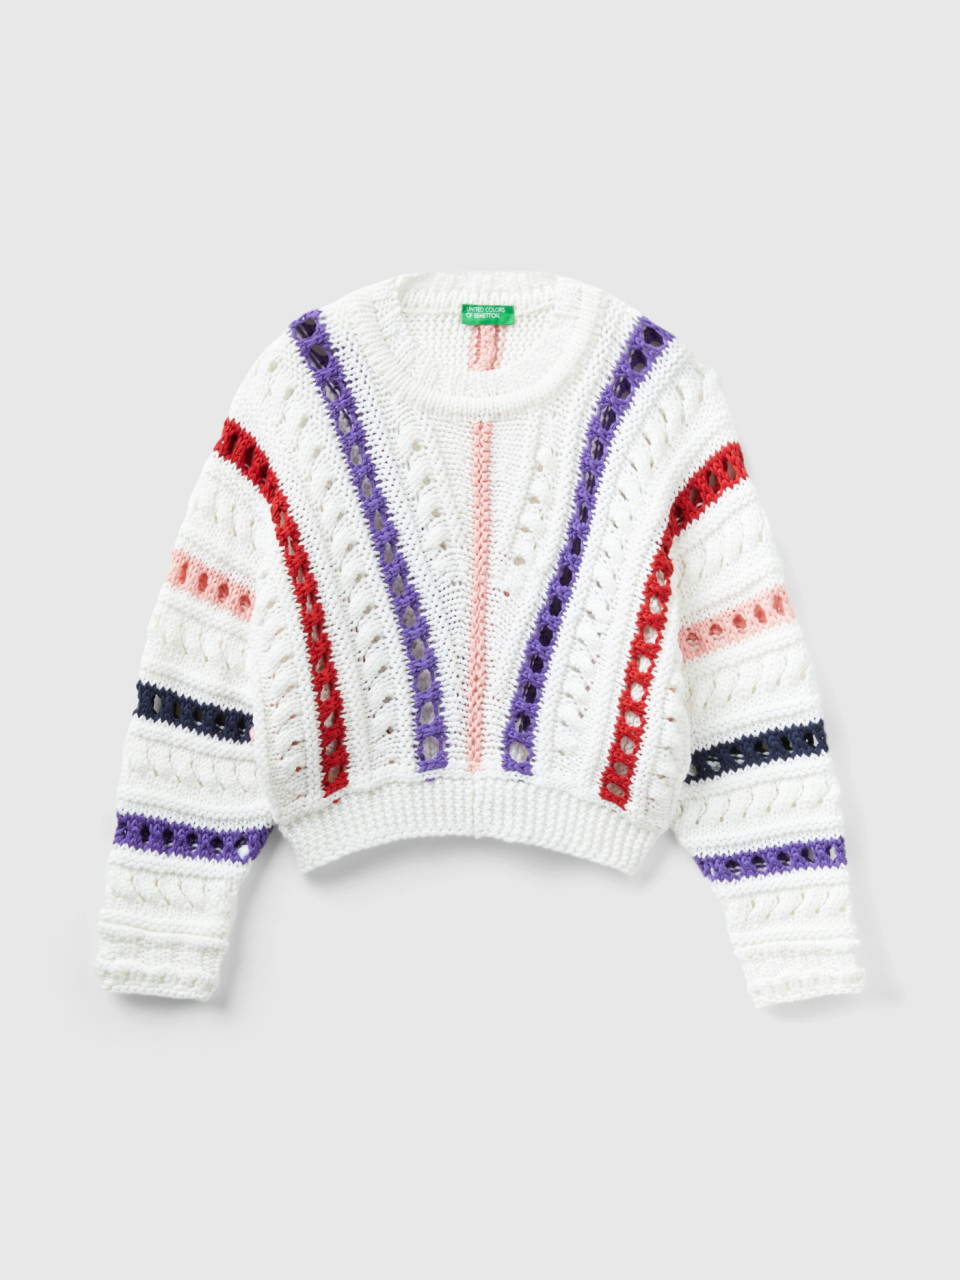 Benetton, Sweater With Cable Knit And Perforations, Creamy White, Kids